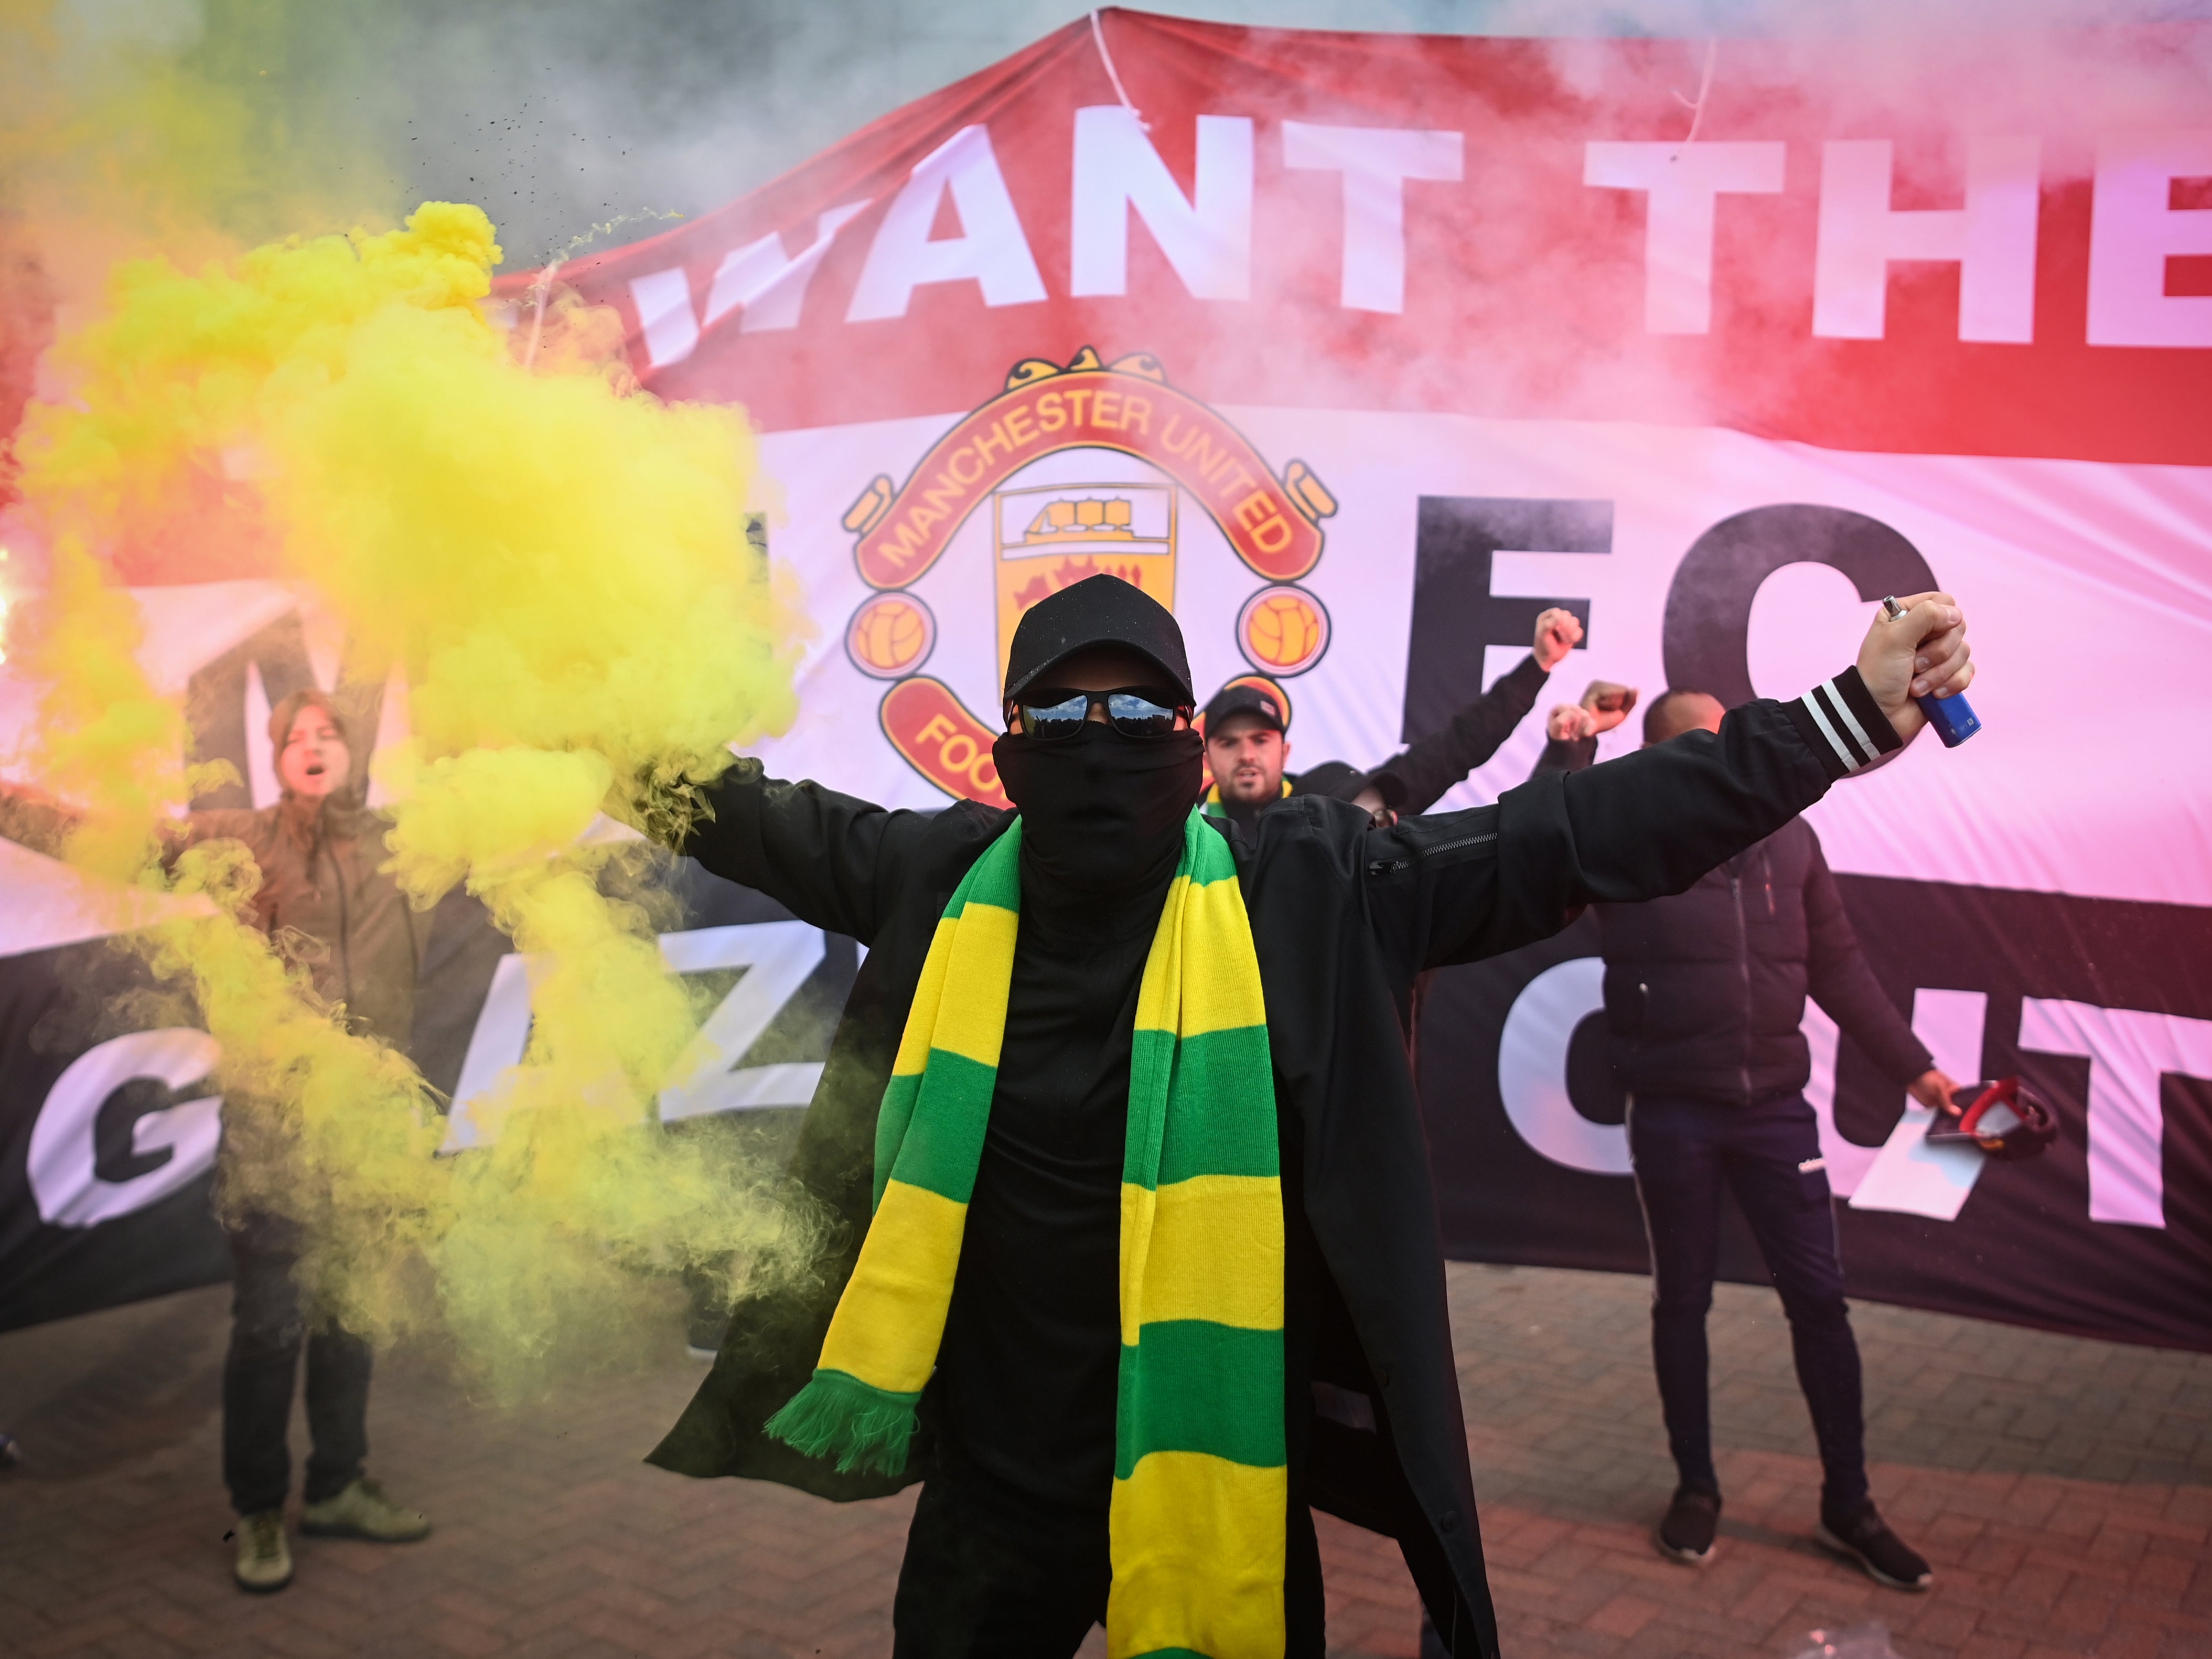 Manchester United fans protesting the Glazer family’s ownership after the Super League collapse